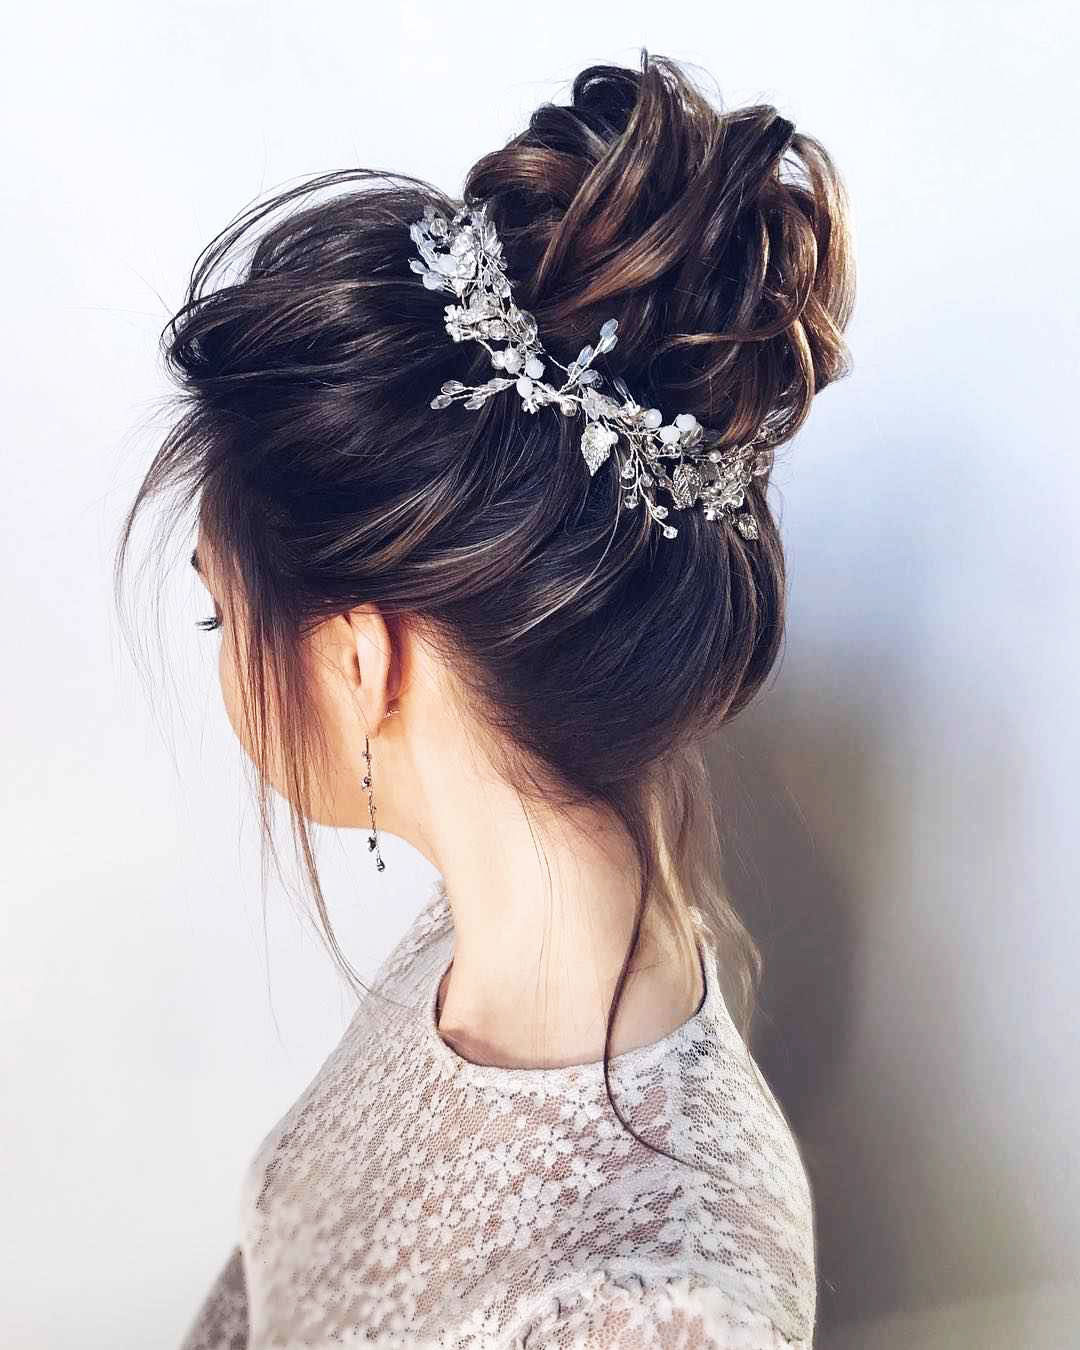 2020 Prom Hairstyles
 61 Latest Hairstyles For Graduation Ideas 2019